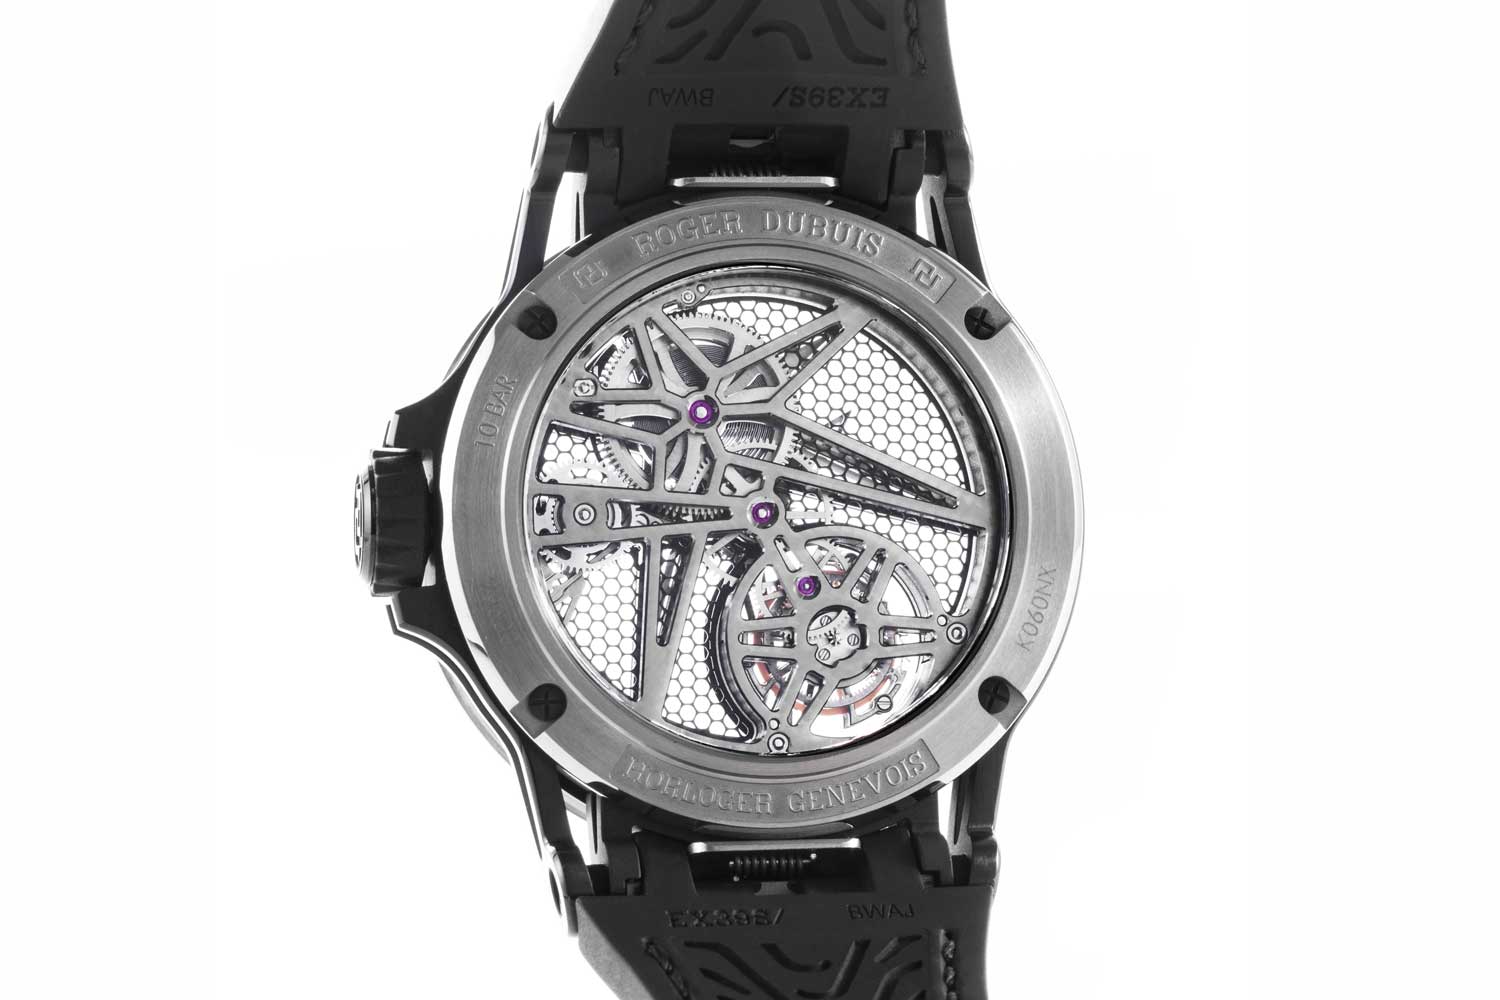 The watch features a circular-grained main plate and bridges with NAC coating. The grill décor with its hexagonal pattern between the main plate and the bridges accentuates the overall design of Calibre RD510SQ